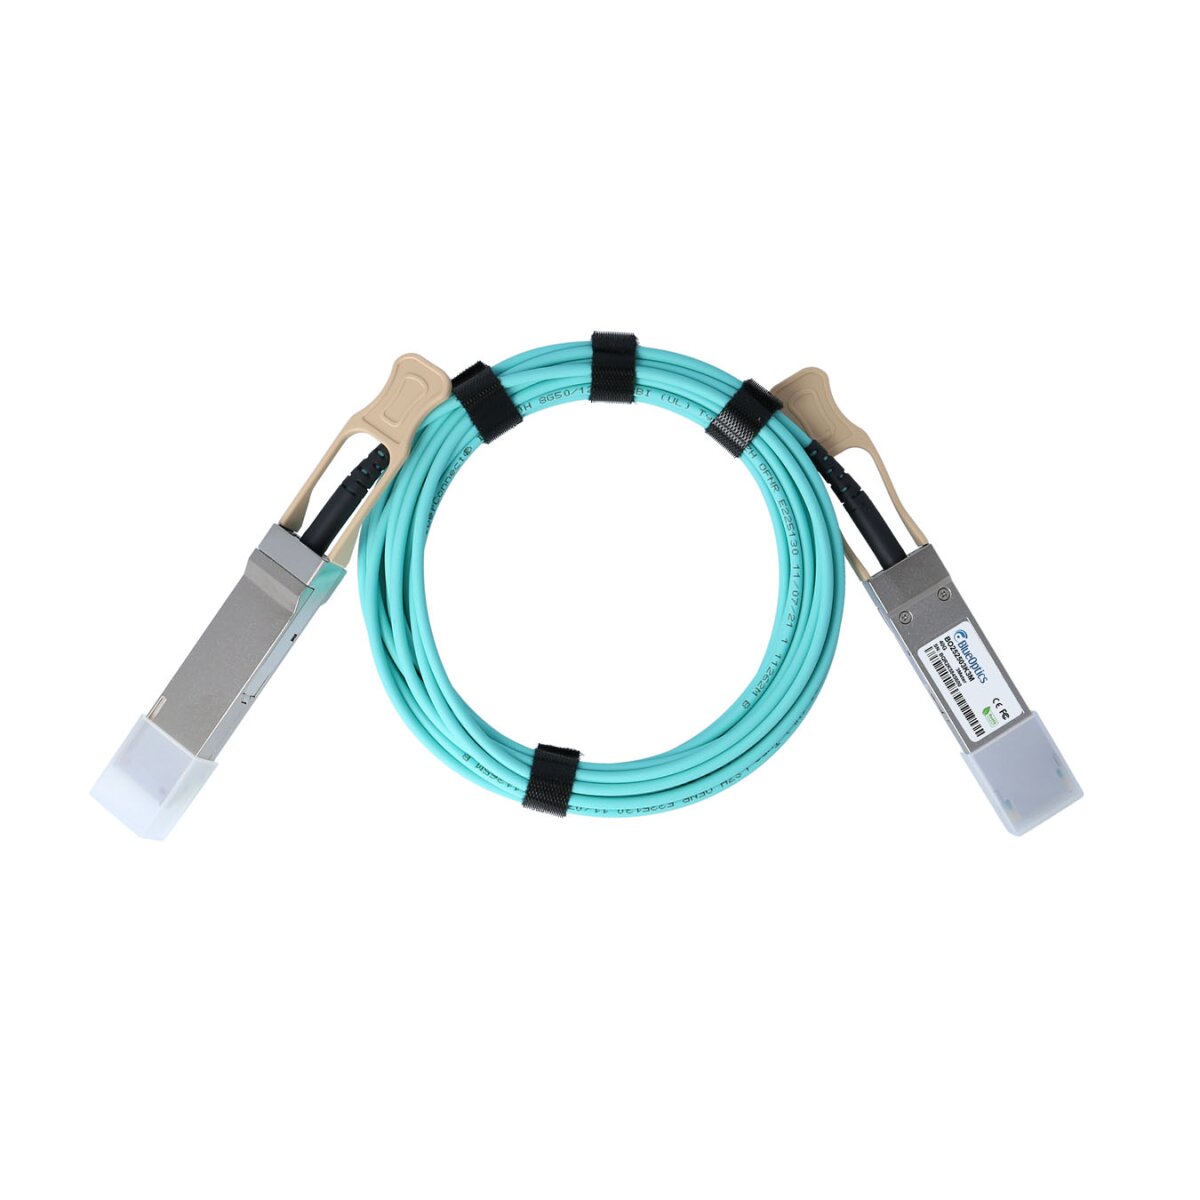 Cheap cables & adapters in online IT shop AG OCTO the